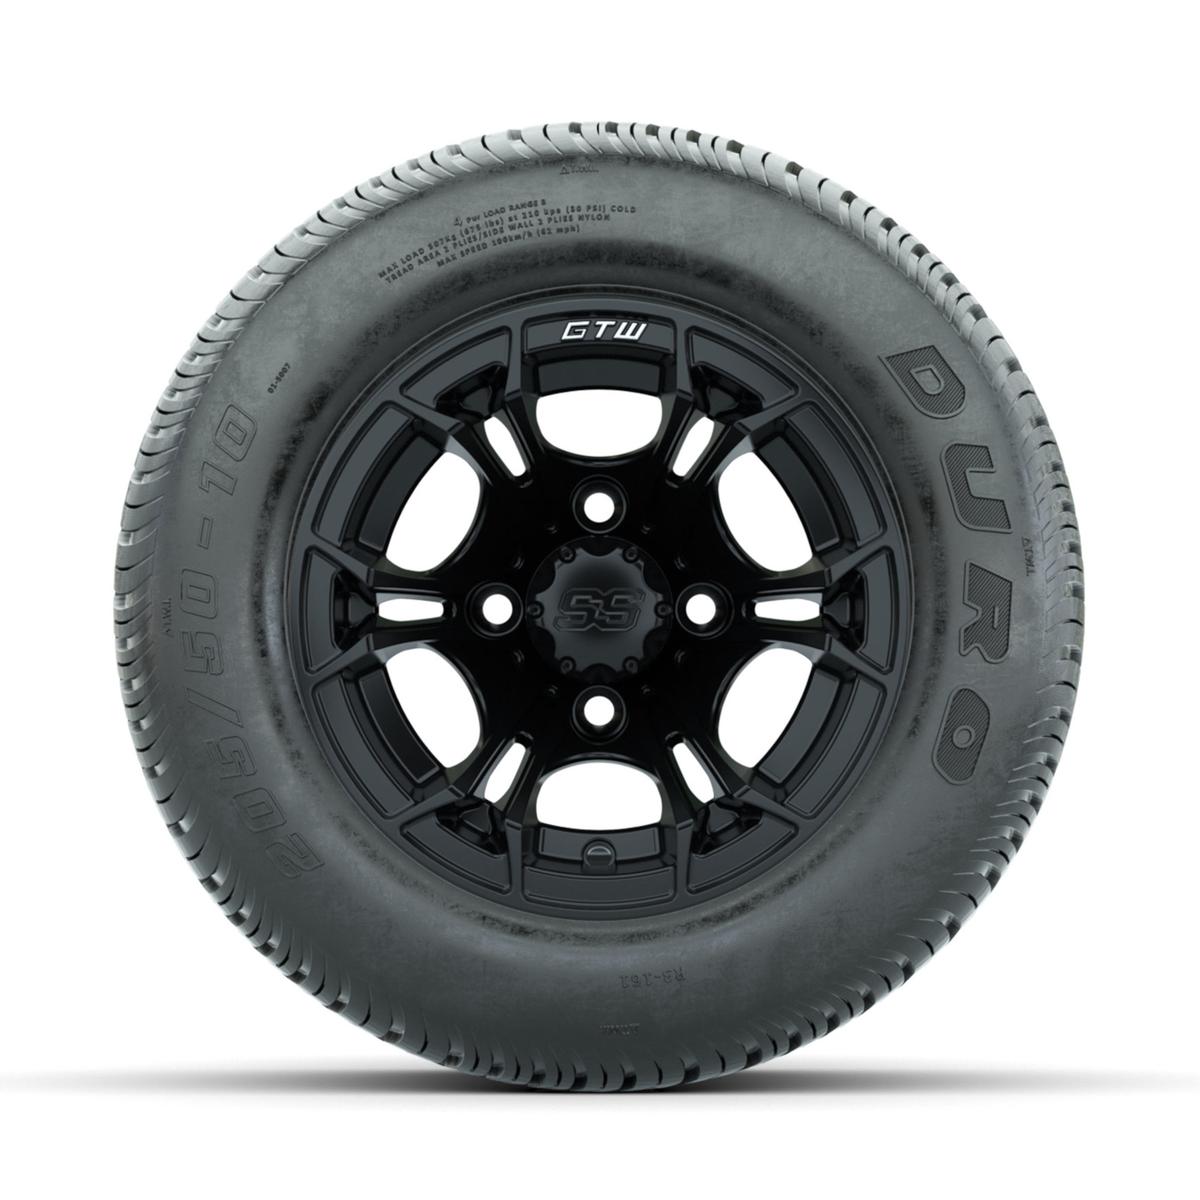 GTW Spyder Matte Black 10 in Wheels with 205/50-10 Duro Low-profile Tires – Full Set